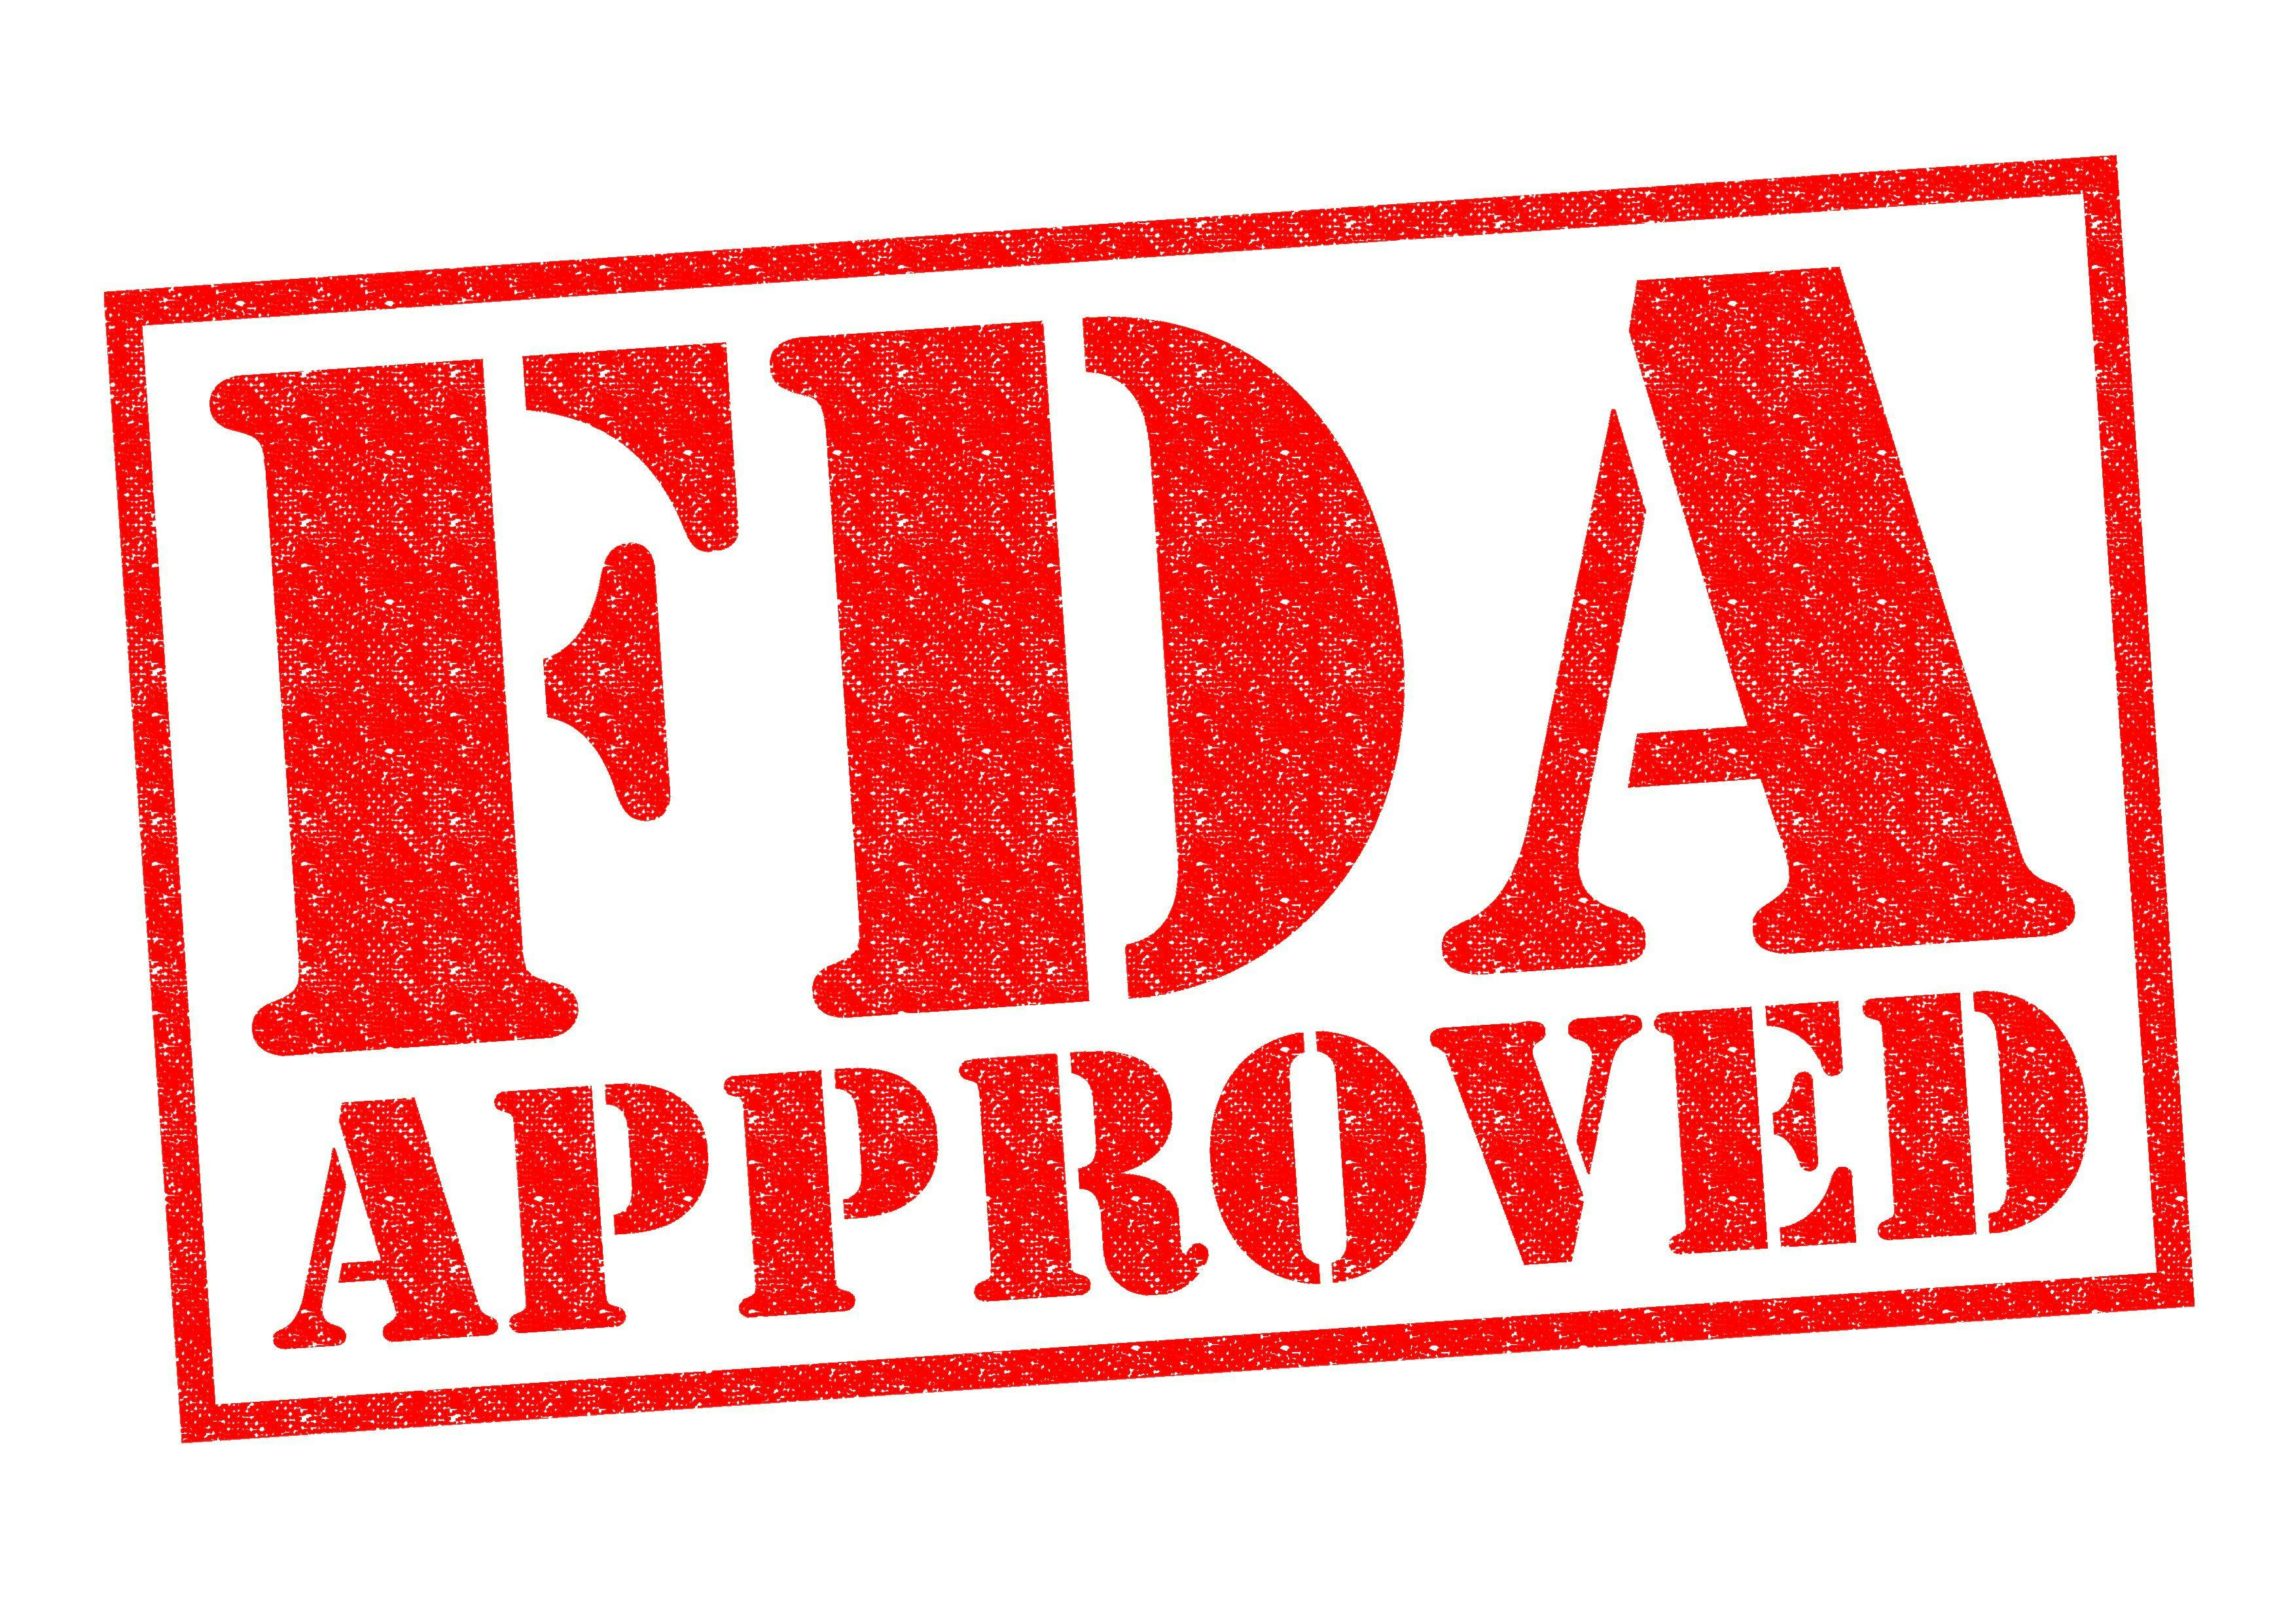 FDA Approves Casgevy, Lyfgenia for the Treatment of Sickle Cell Disease